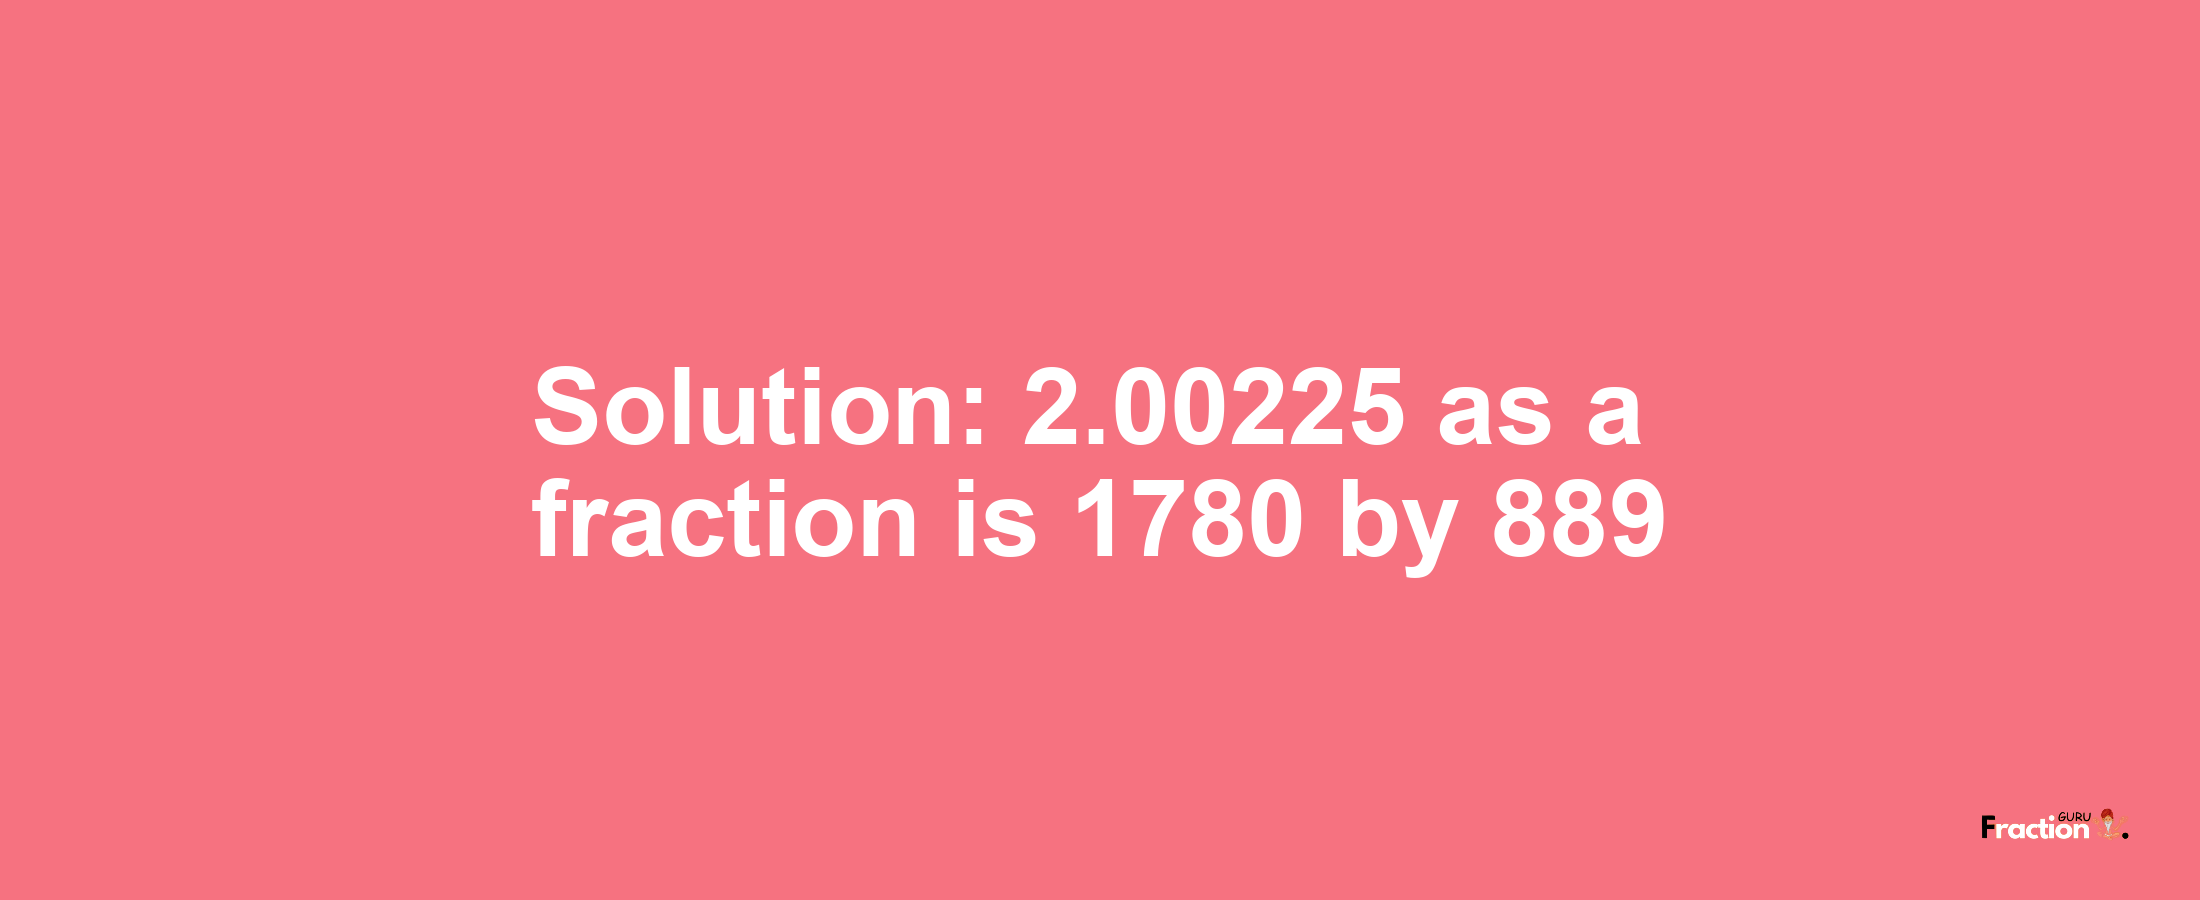 Solution:2.00225 as a fraction is 1780/889